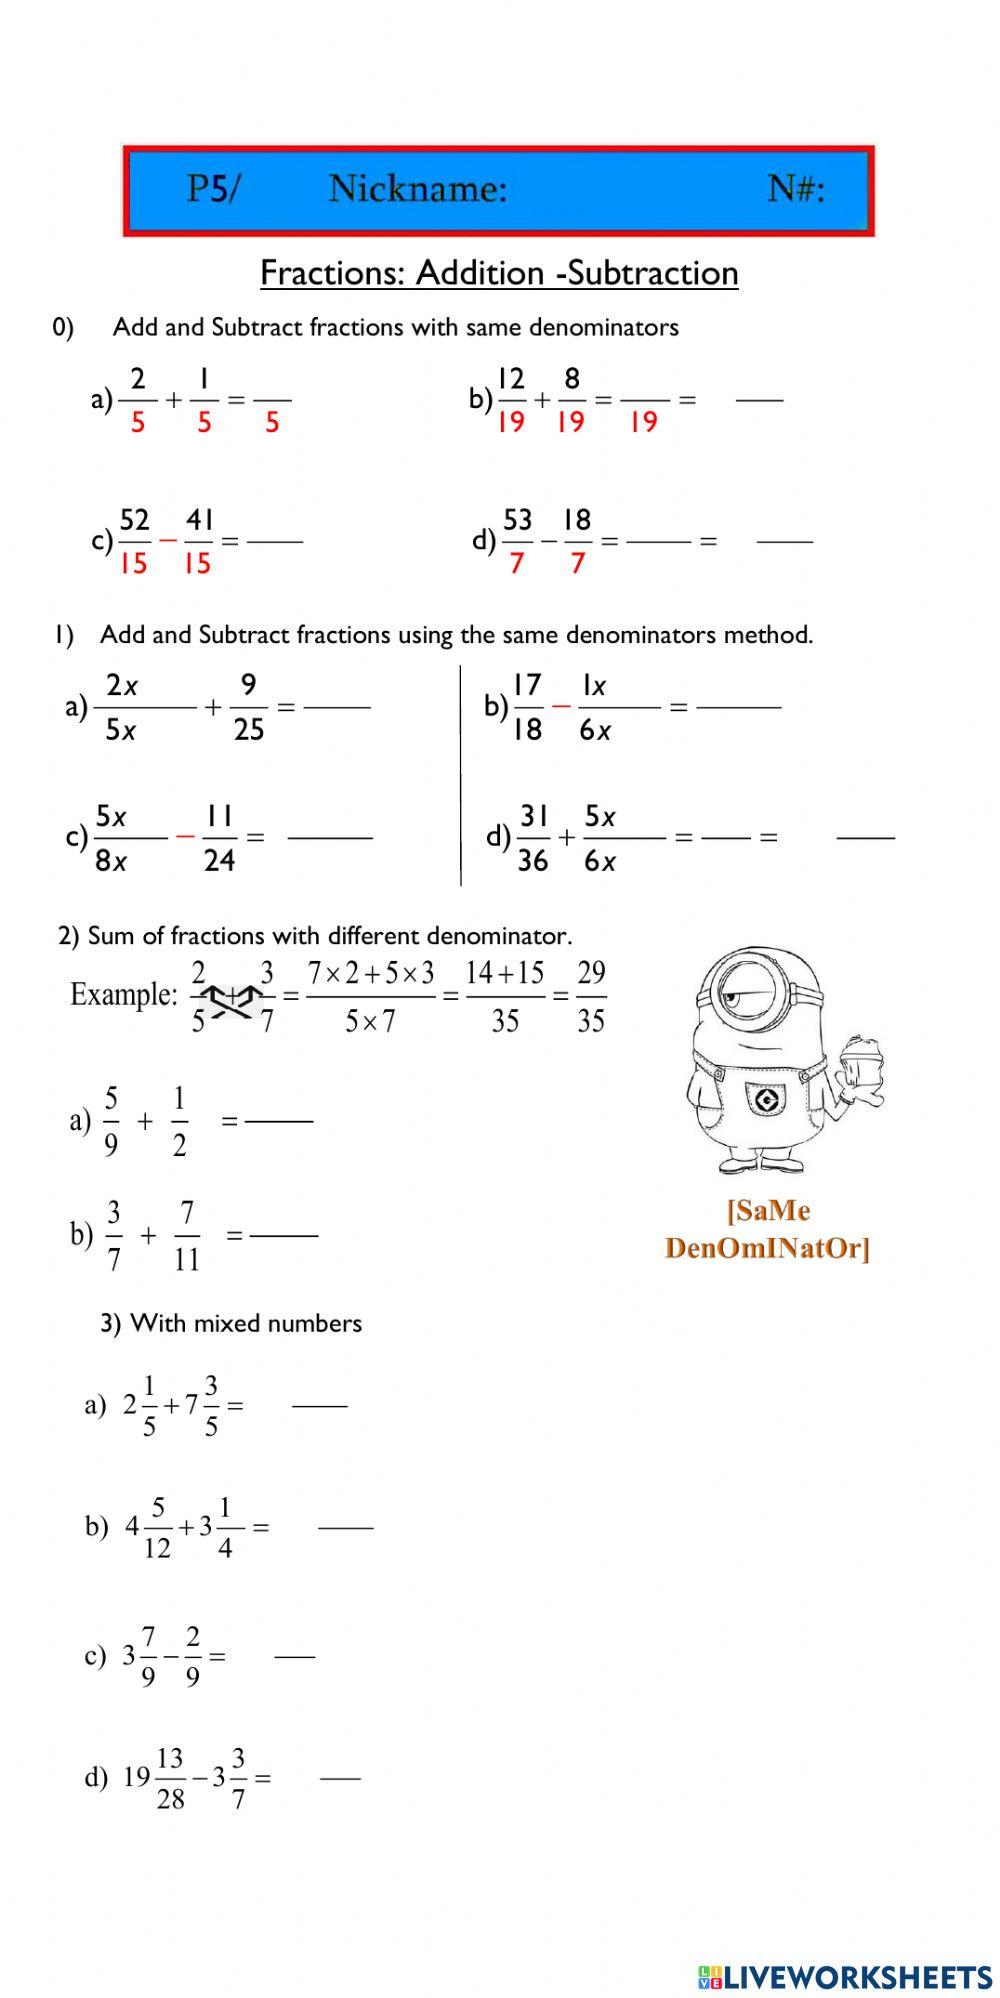 Fractions: Addition-Subtraction 02